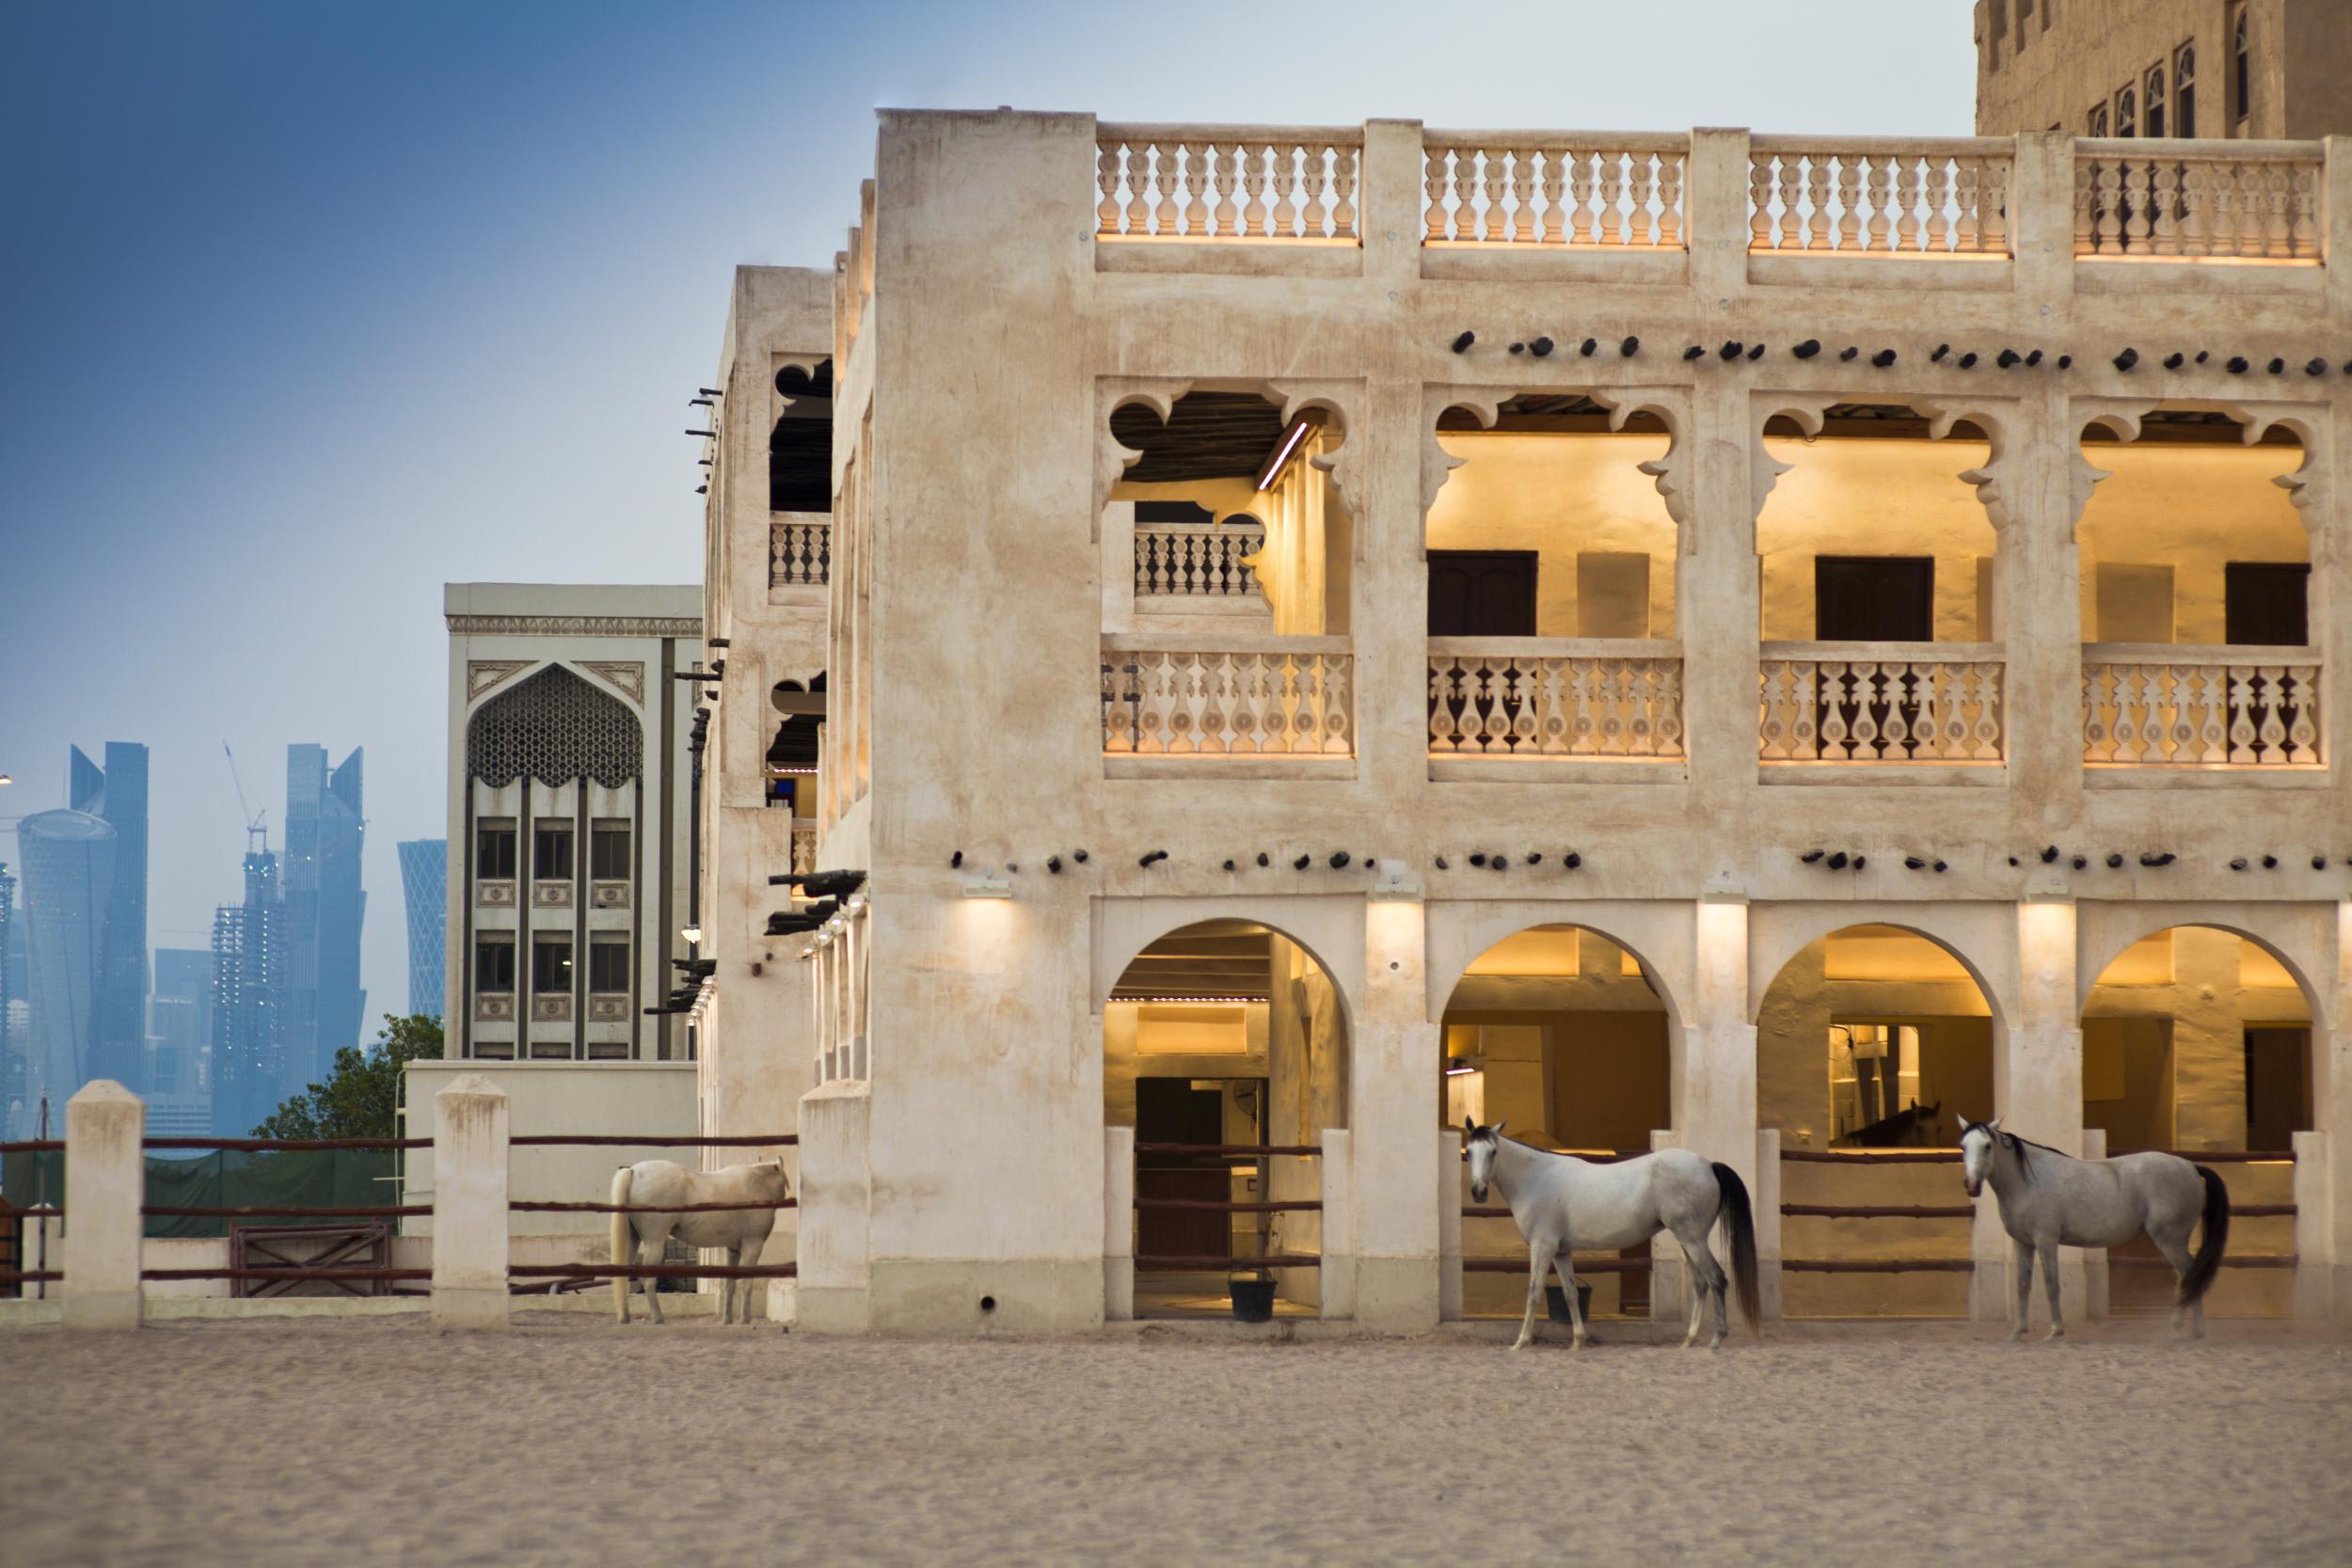 Get lost in labyrinthine Souq Waqif